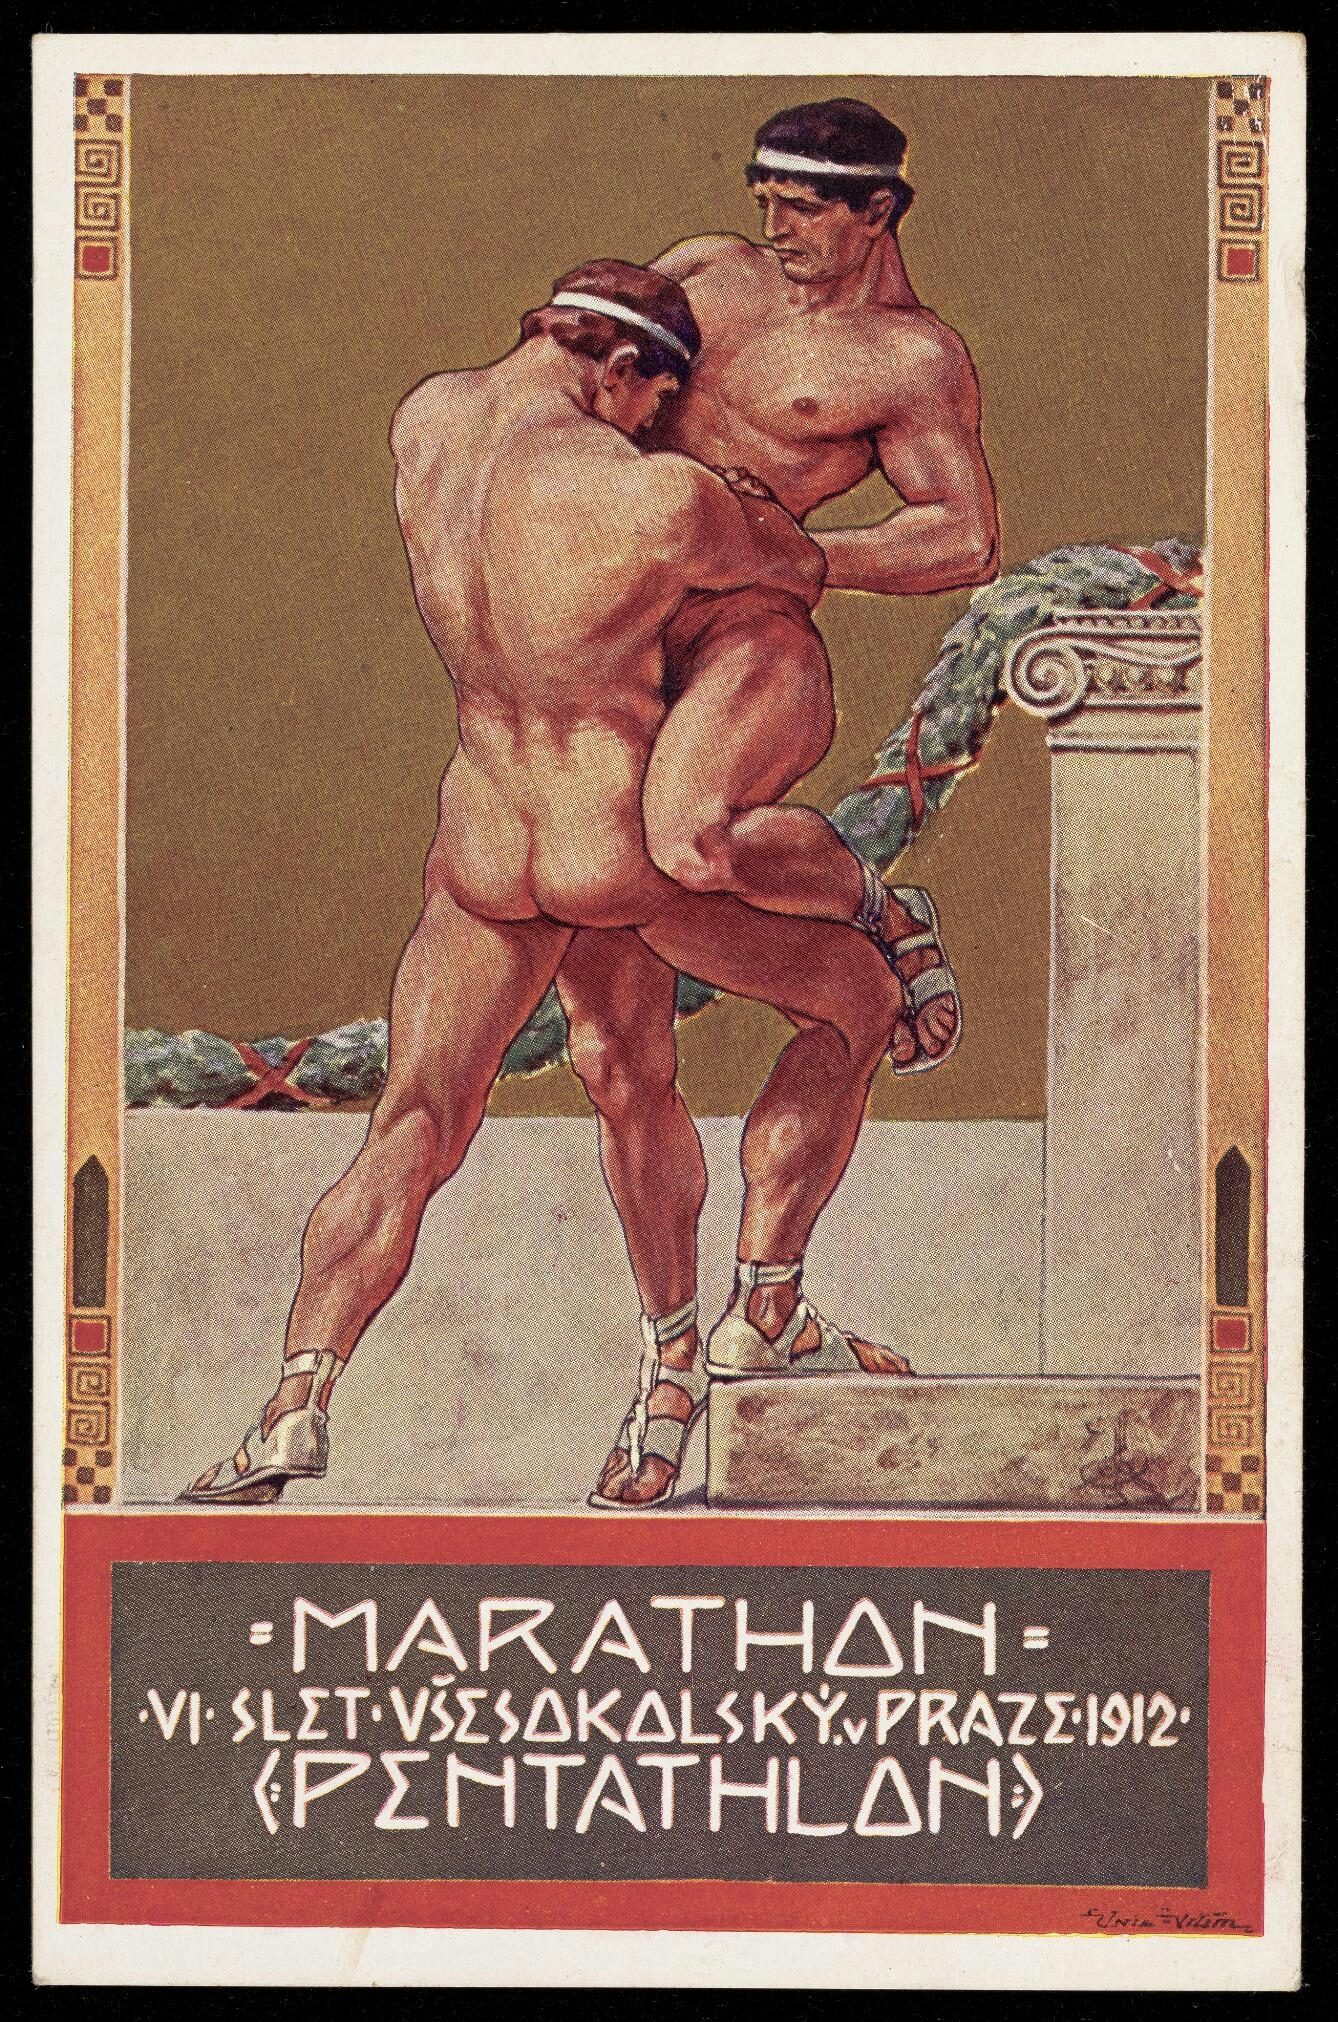 Image of postcard with colour painting of two nude men wrestling.